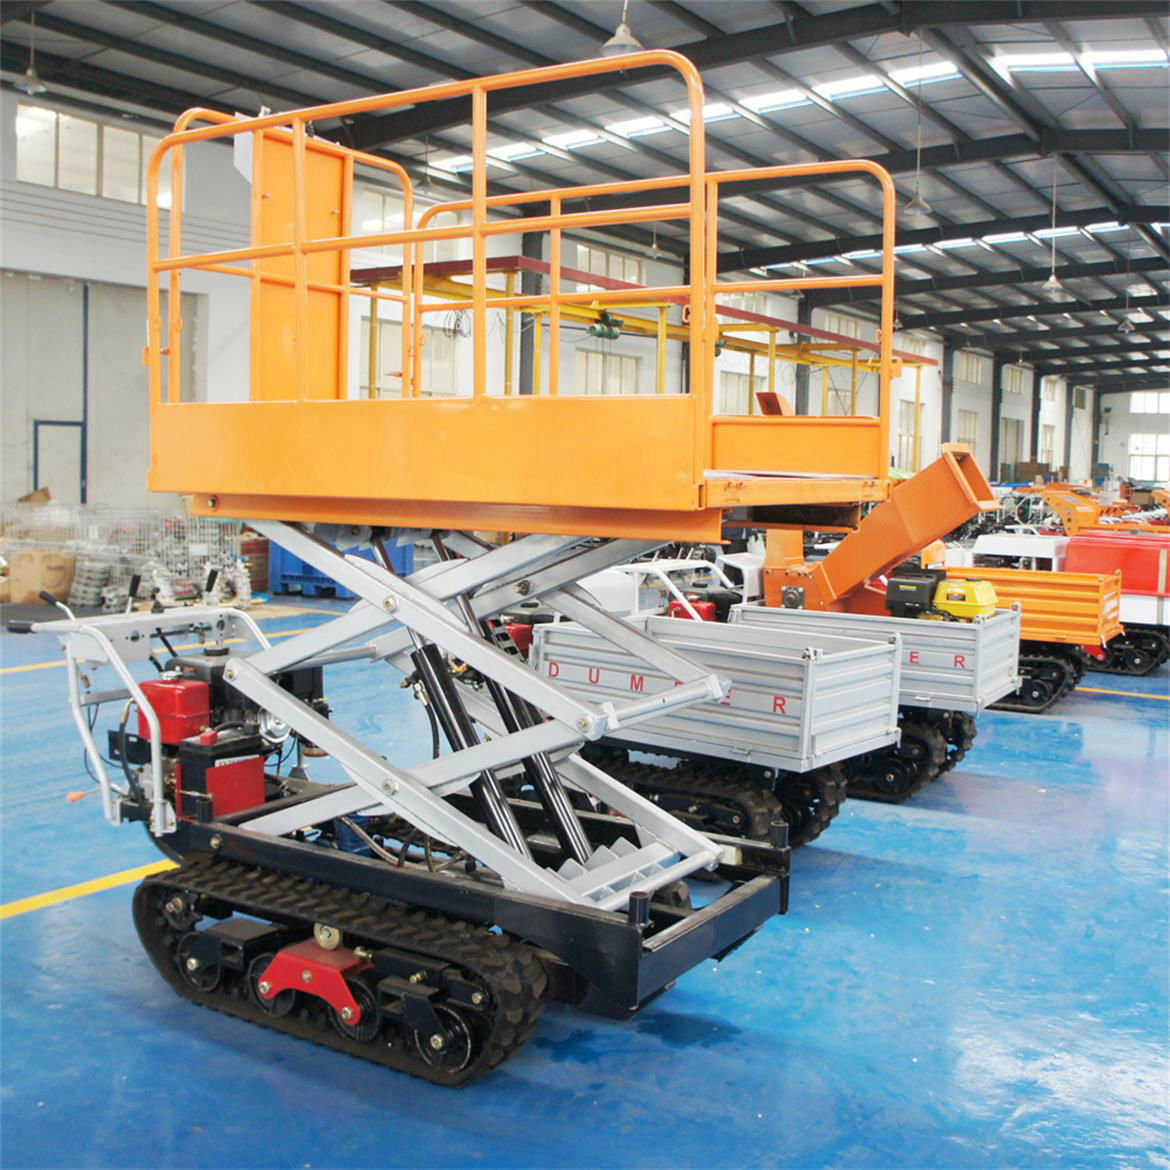 Crawler dumper with lift container Hydraulic Scissor lifter Picking platform 3